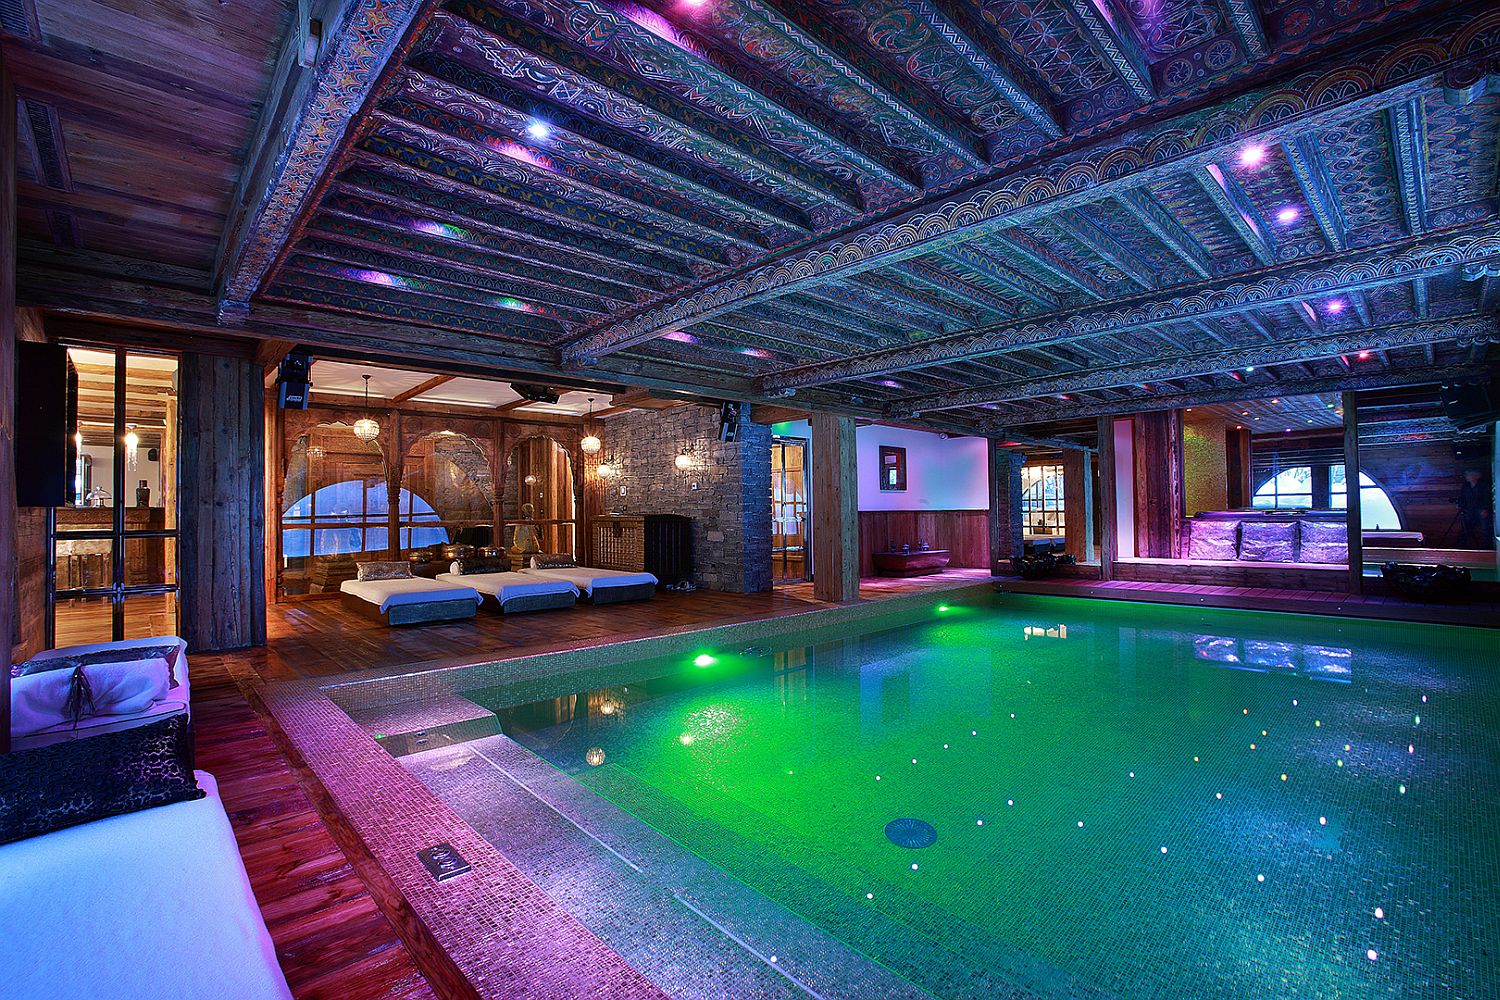 Beautifully-carved-wooden-beams-at-the-luxury-French-chalet-sit-in-contrast-to-contemporary-pool-space